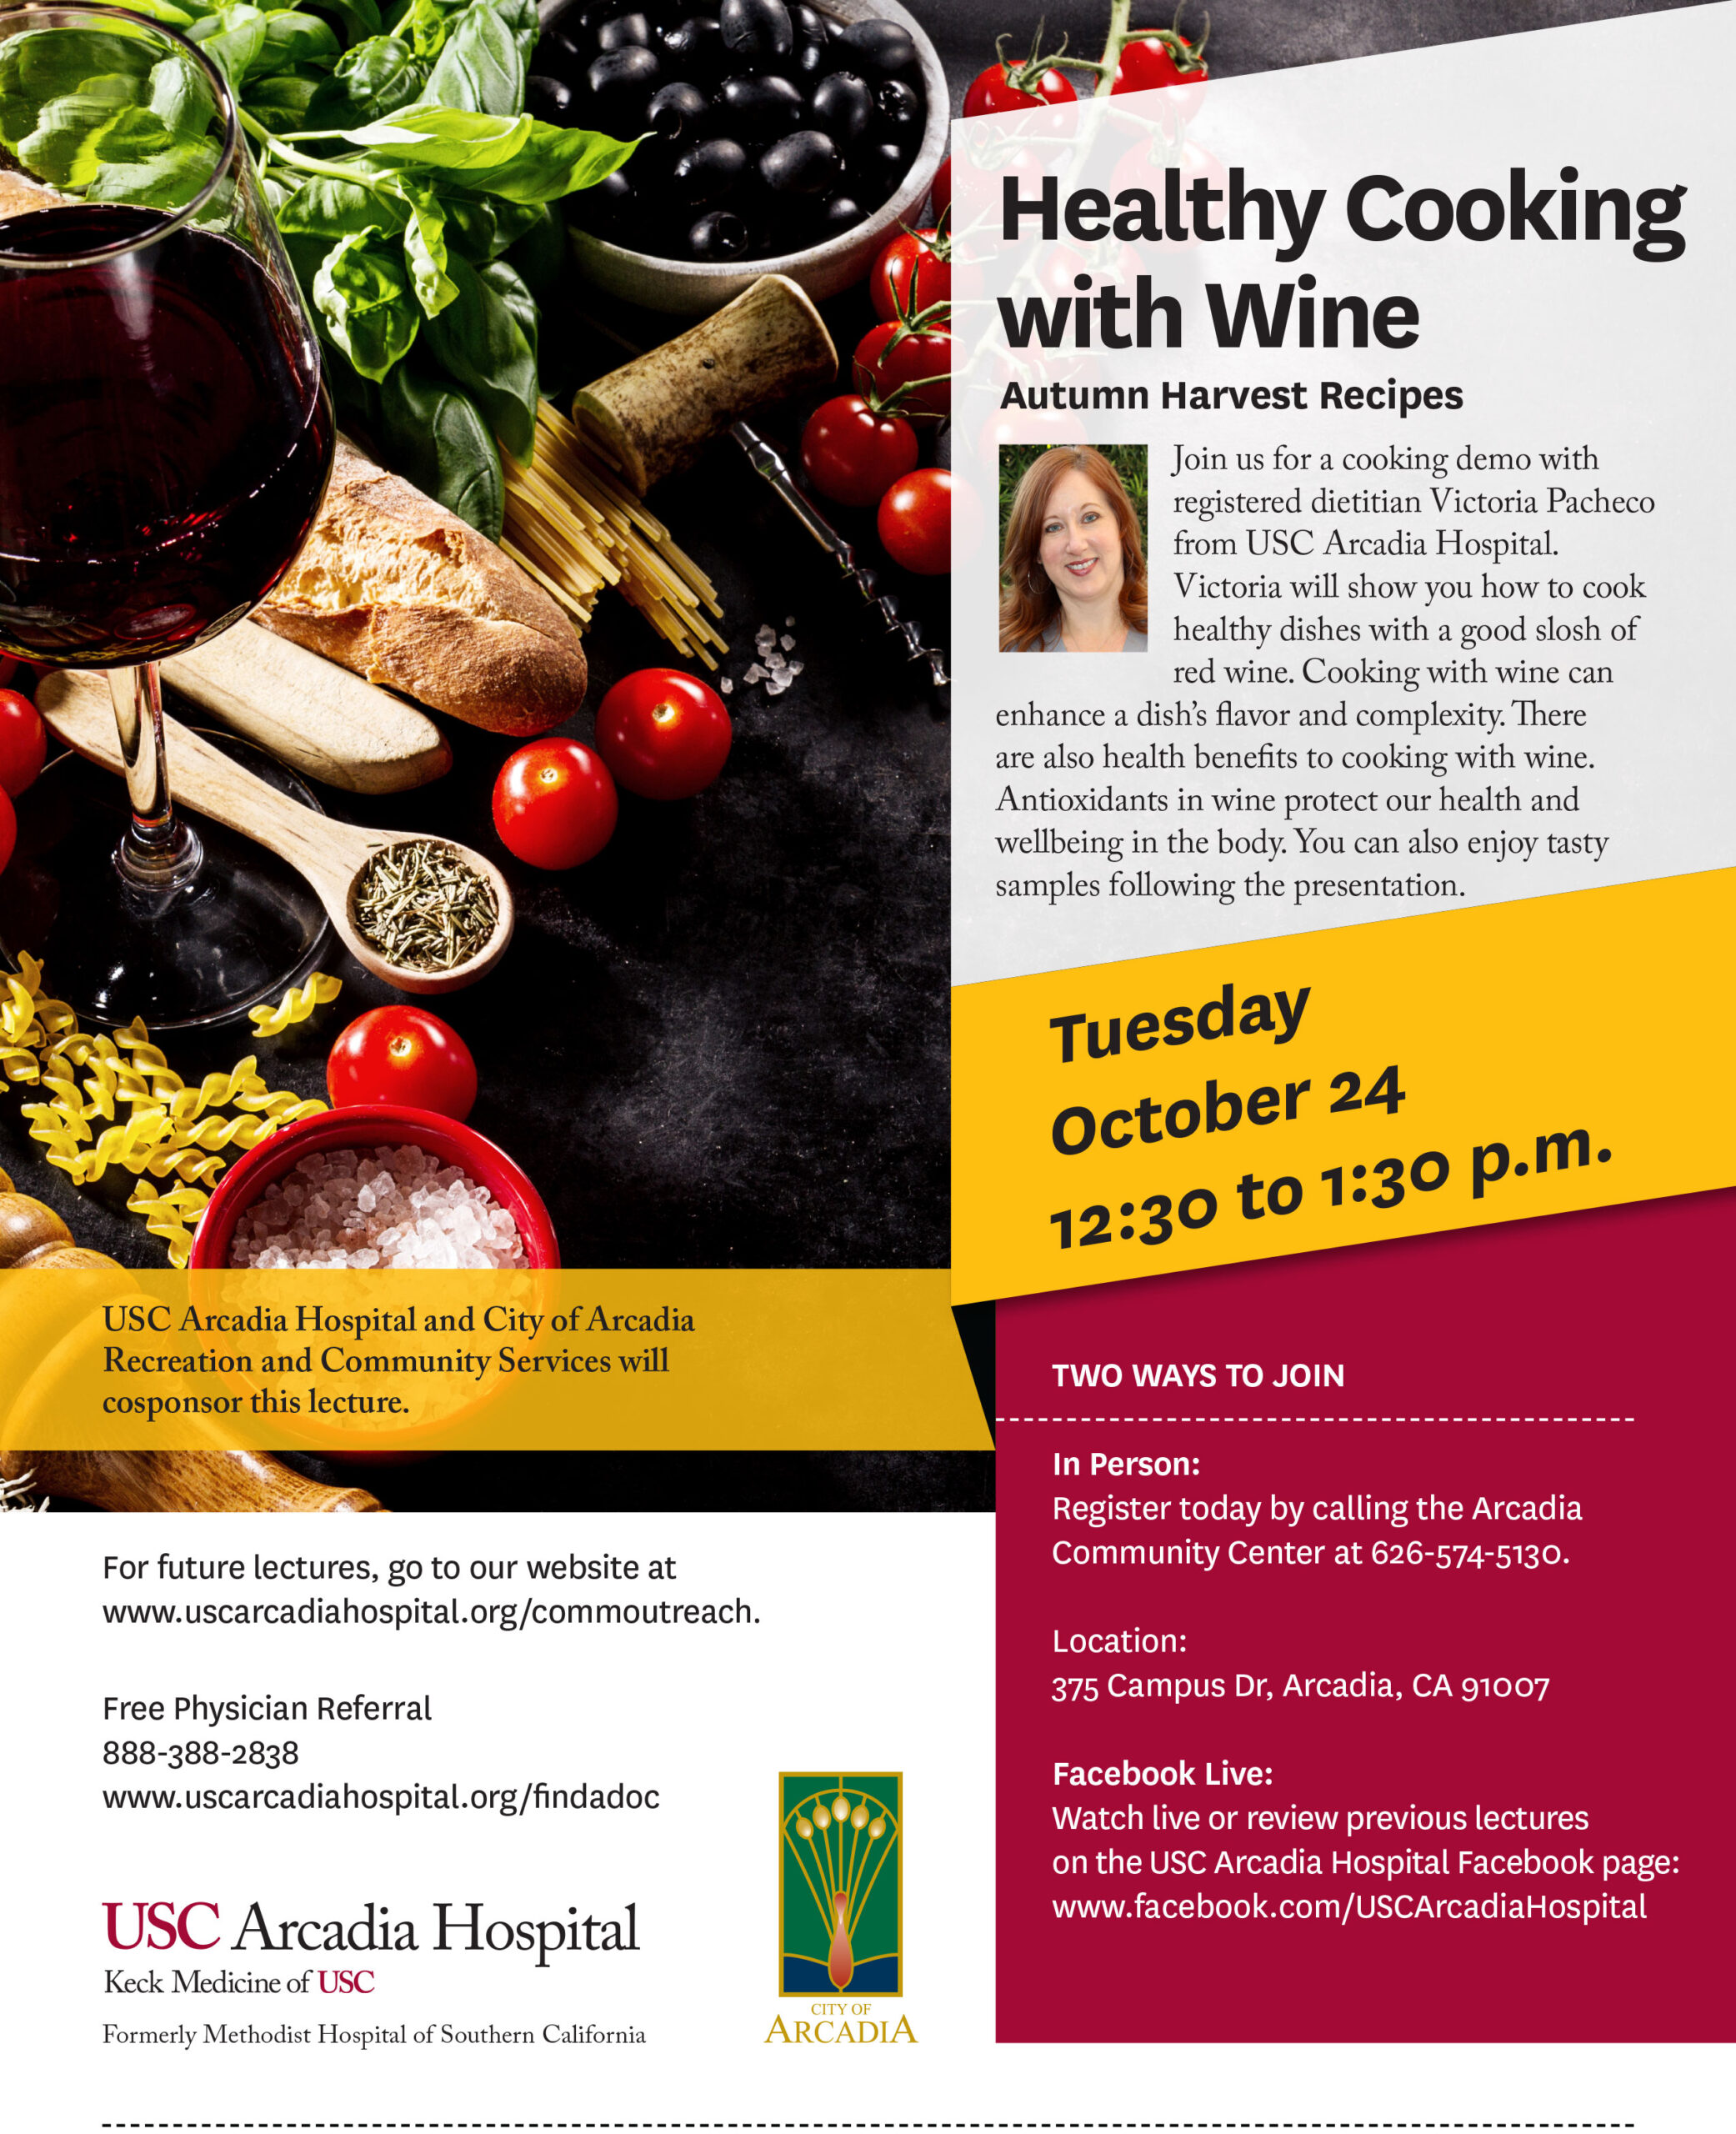 USC Arcadia Hospital Healthy Cooking with Wine seminar